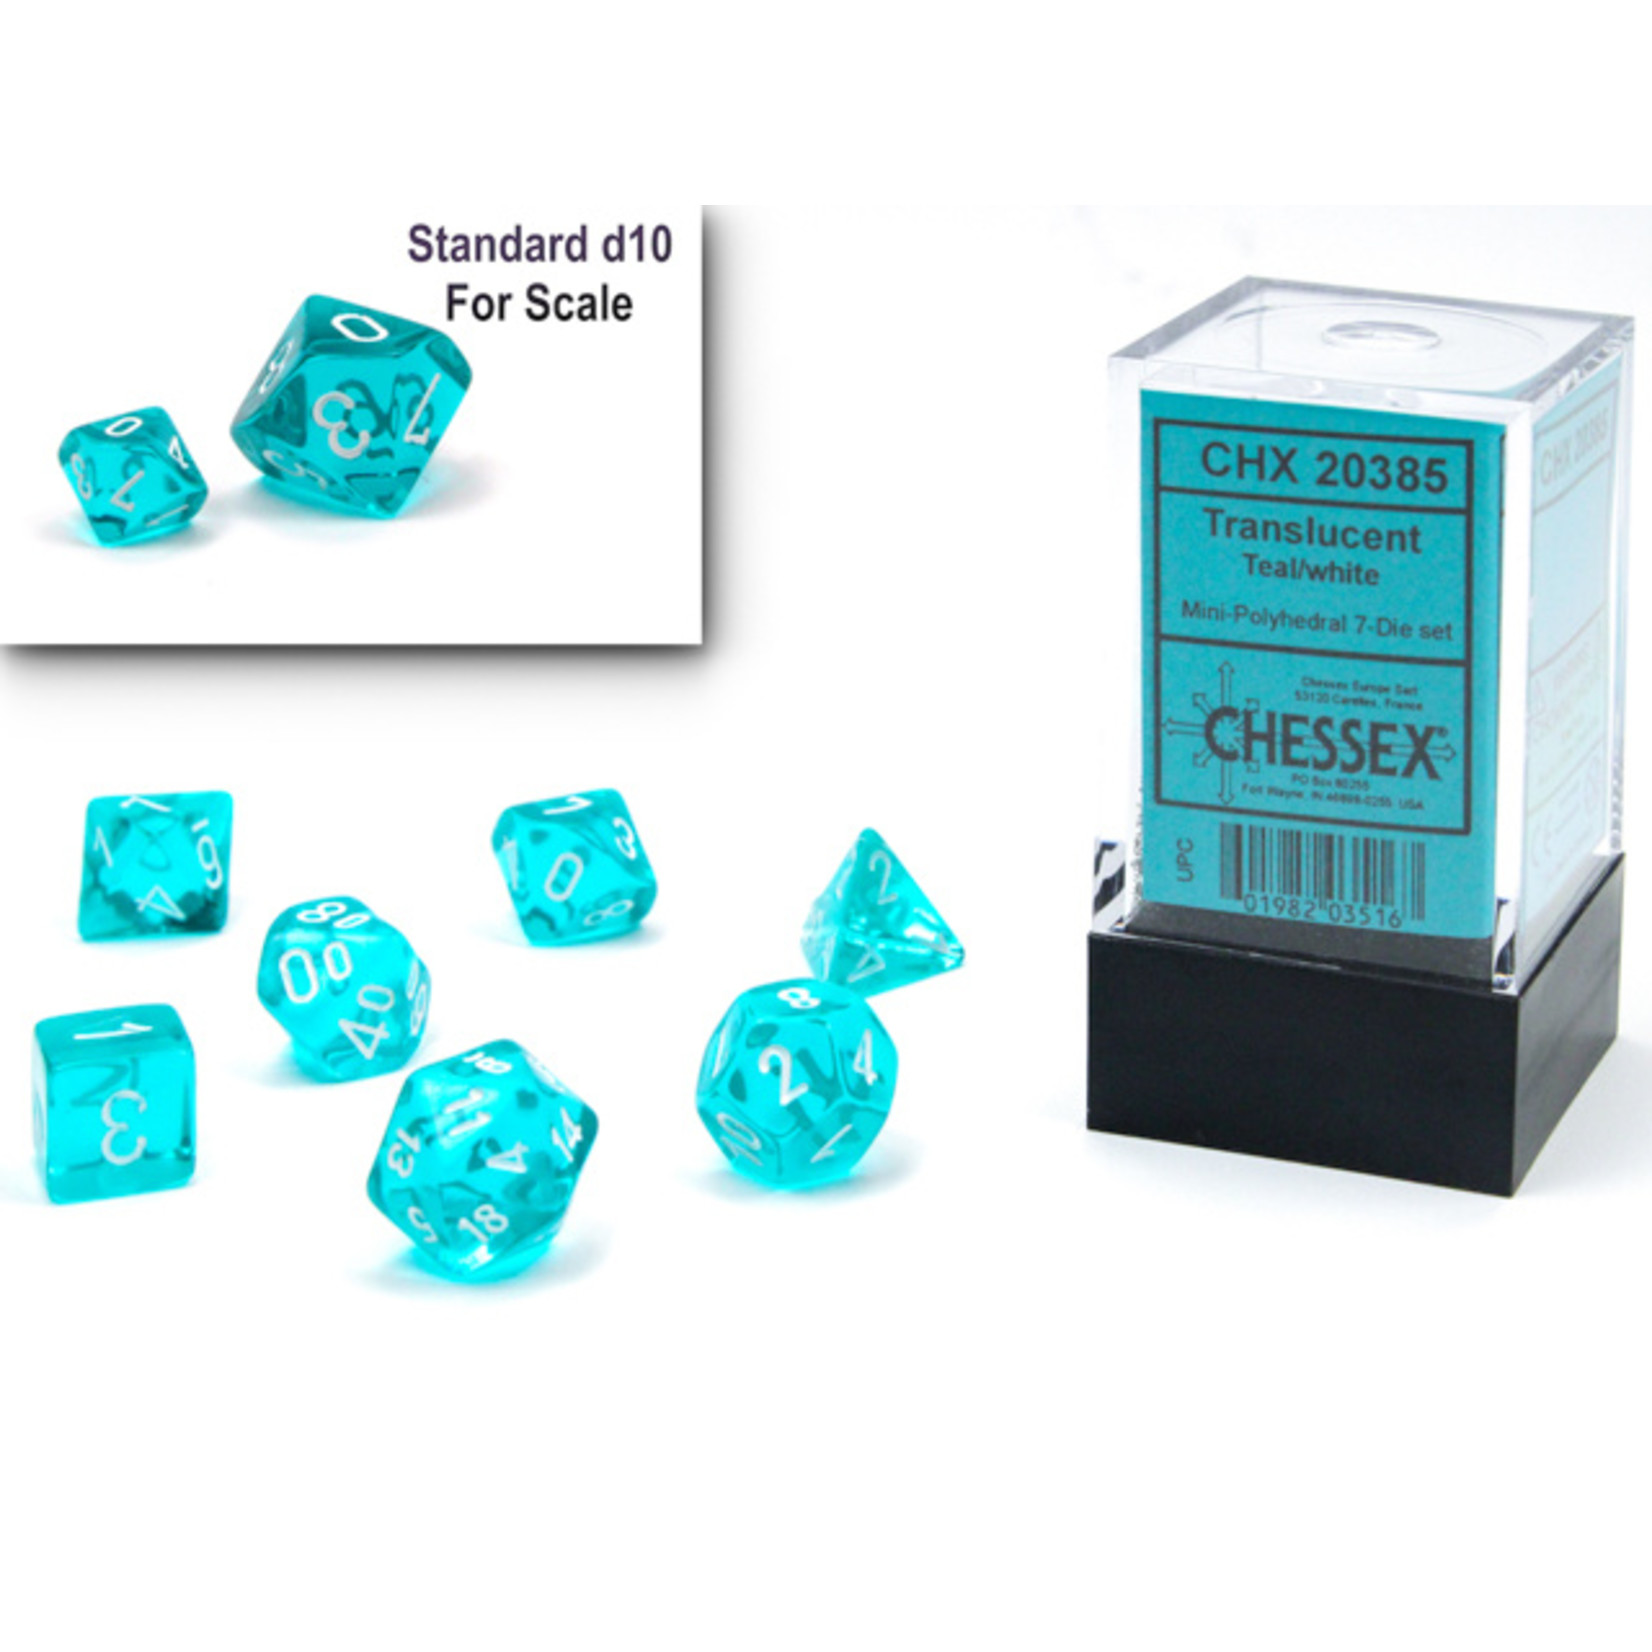 Chessex 20385 Mini Translucent Teal with White 7-Set